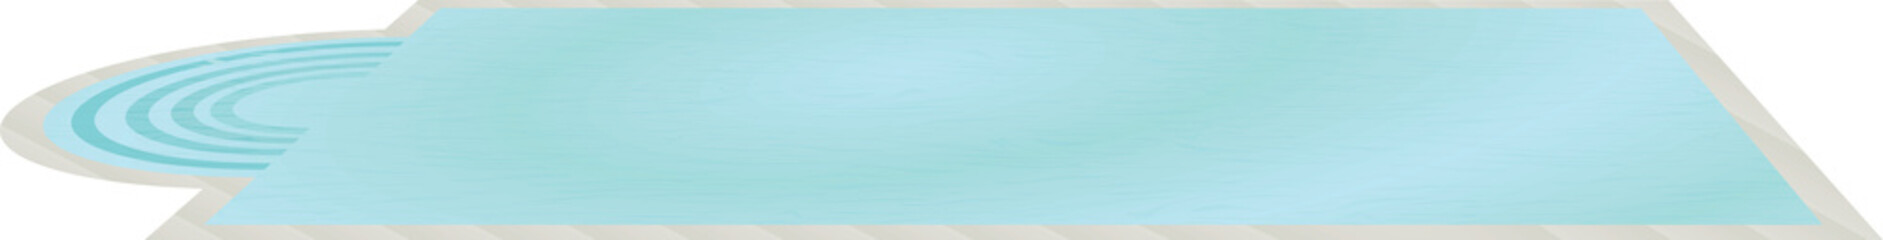 Swimming pool. top view. vector illustration